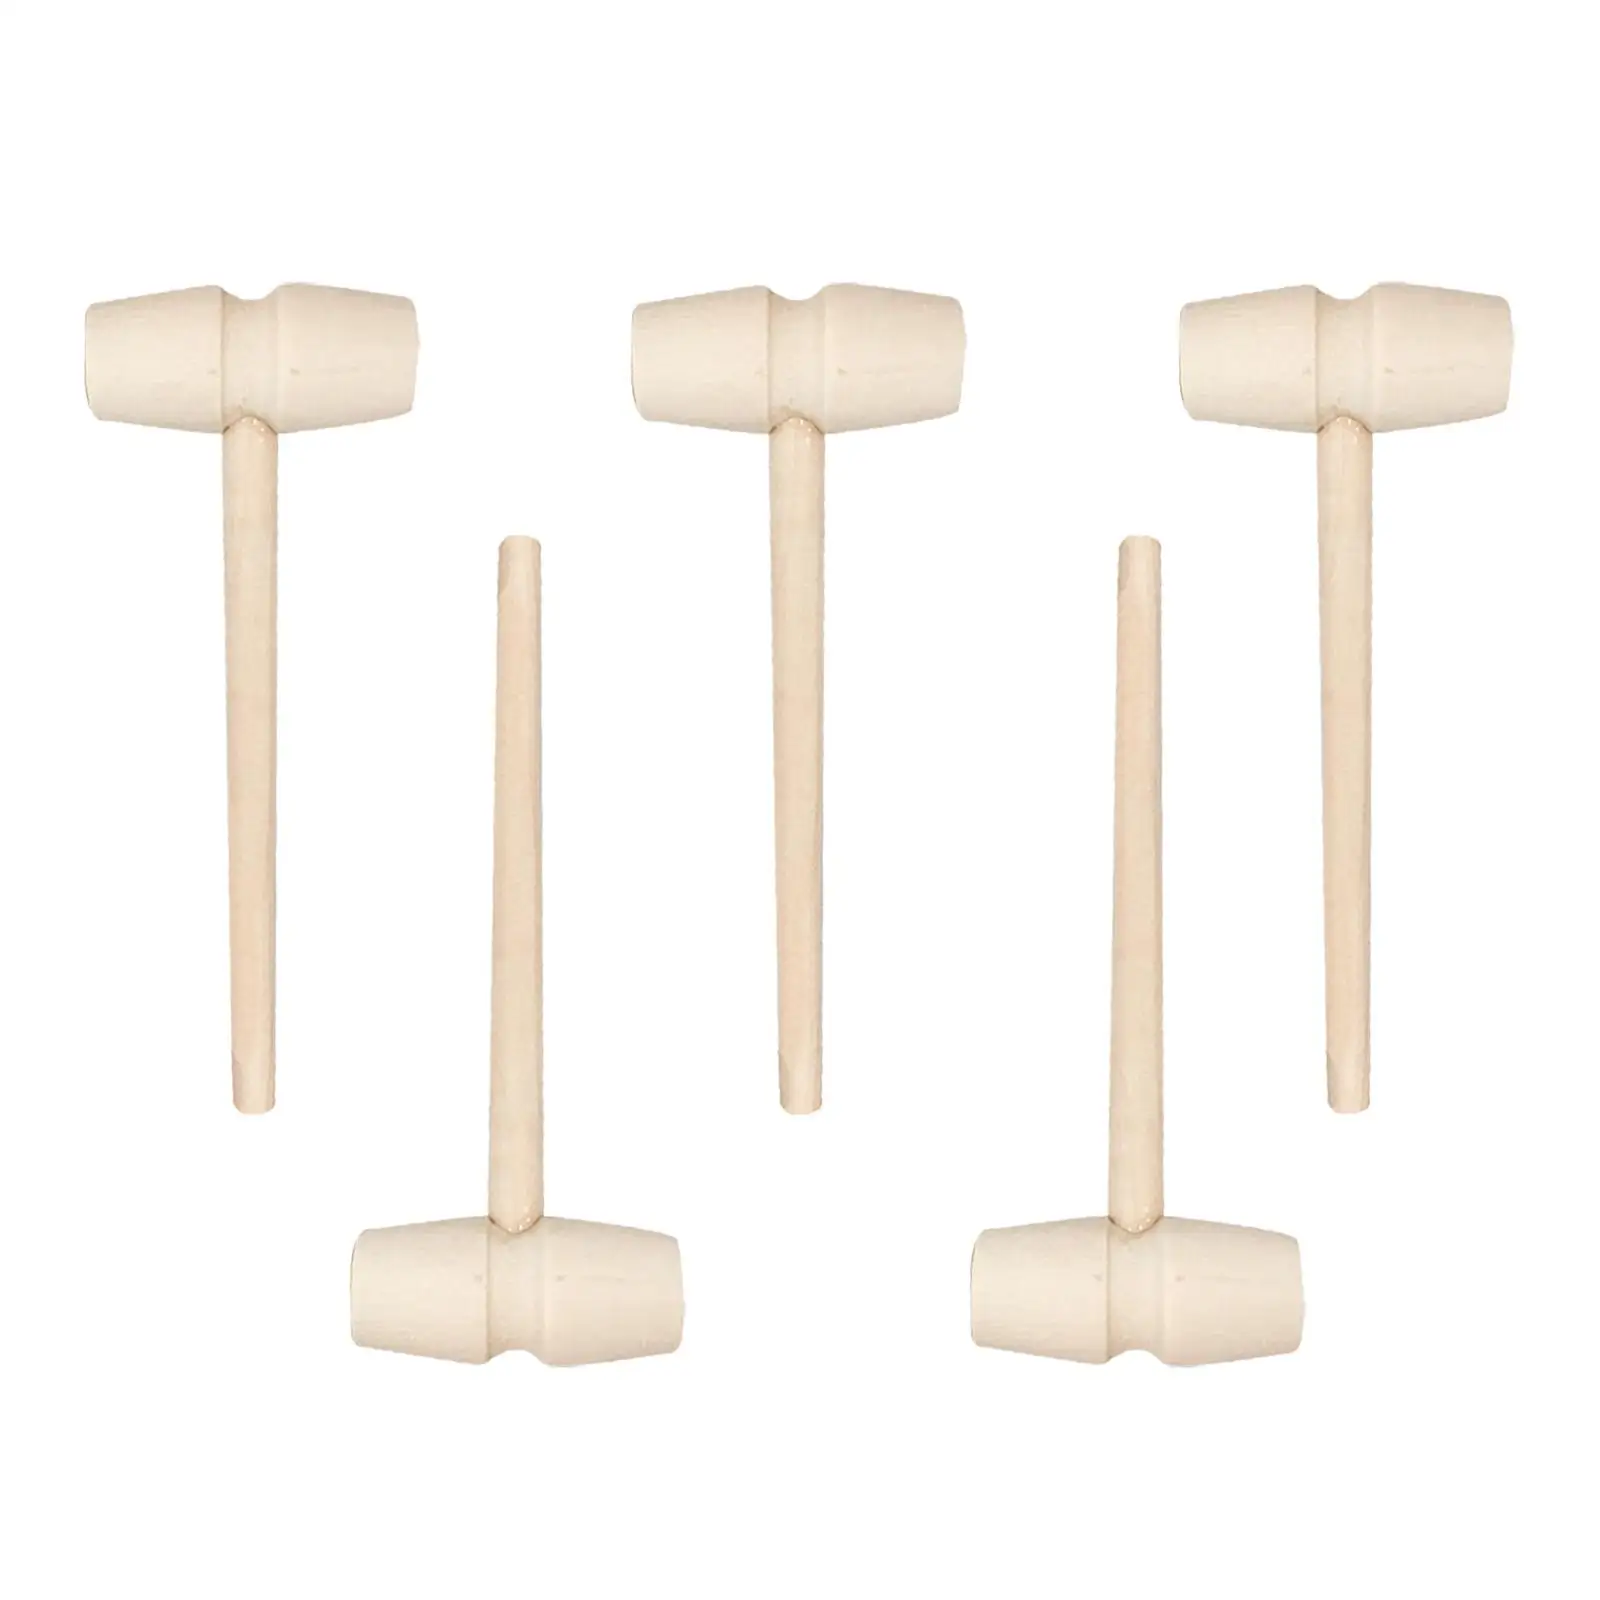 5x Multipurpose Mini Wooden Hammers, Kids Beating Toys Wood Hammer Seafood Hammer Mallet for Party Game Props Educational Toys